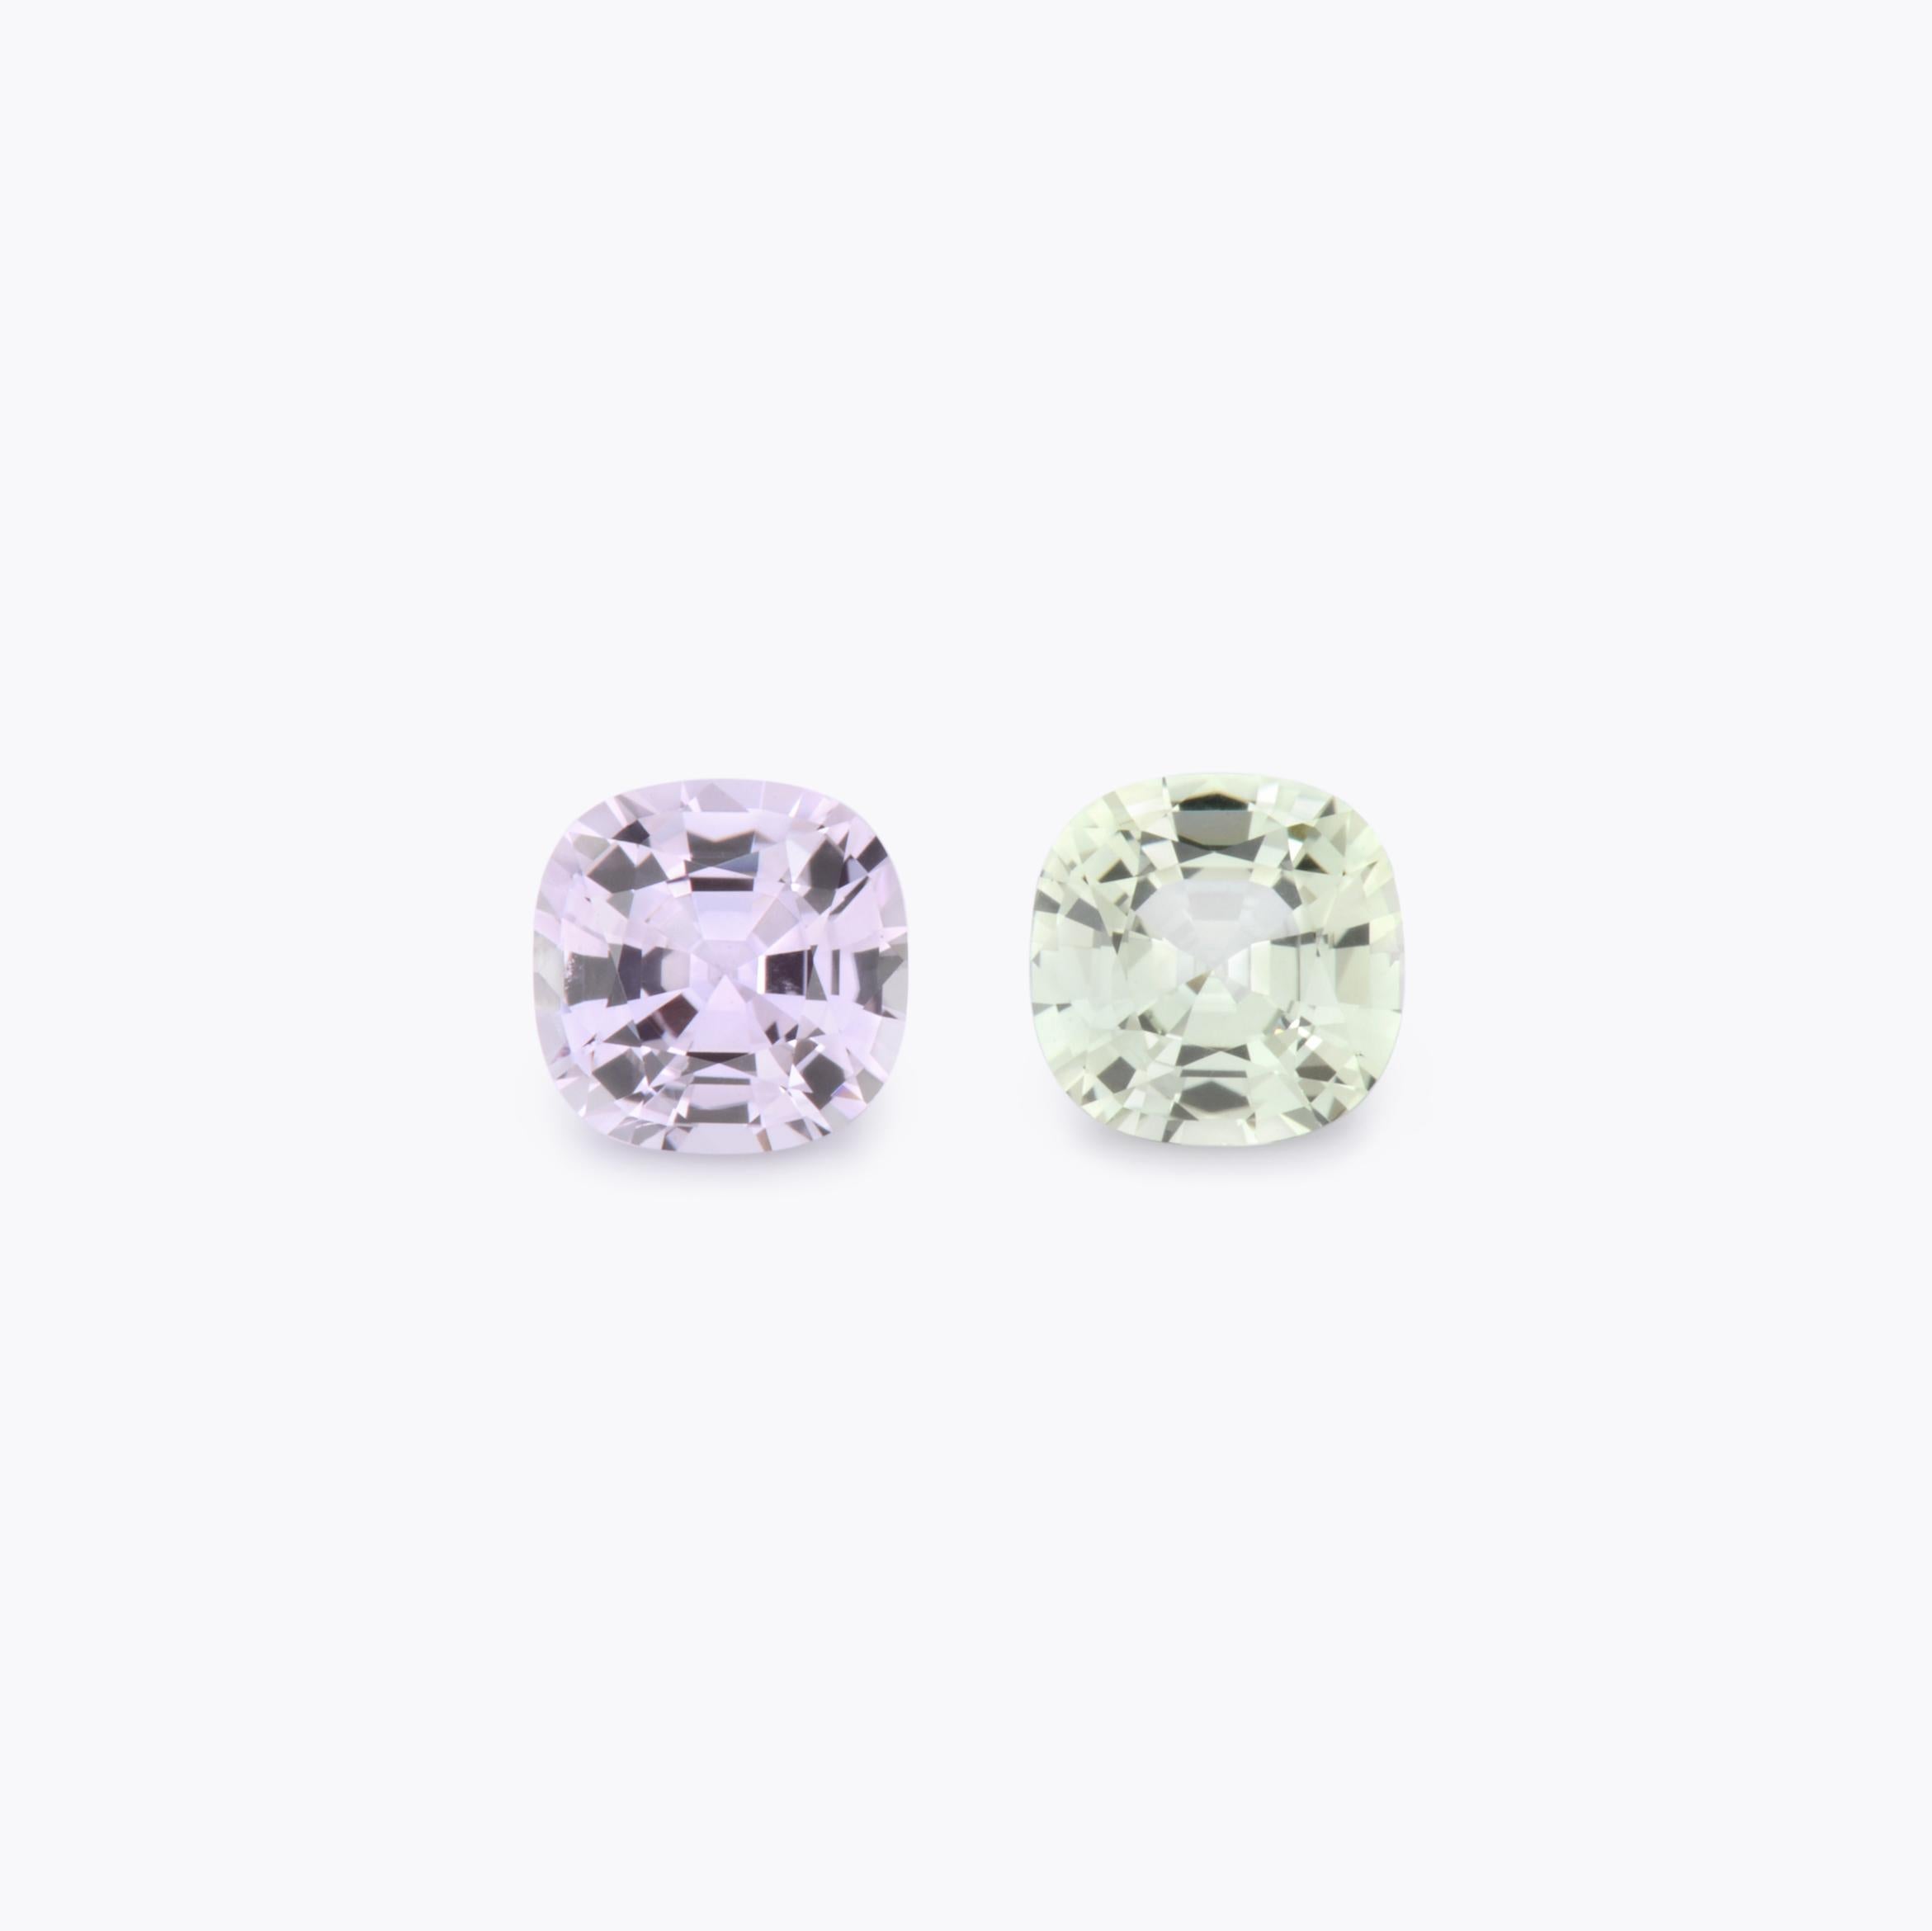 Fine mismatched pastel pair of unheated Madagascar fancy Sapphire gems, weighing a total of 2.25 carats, offered loose to someone special...because opposites attract!
Returns are accepted and paid by us within 7 days of delivery.
We offer supreme